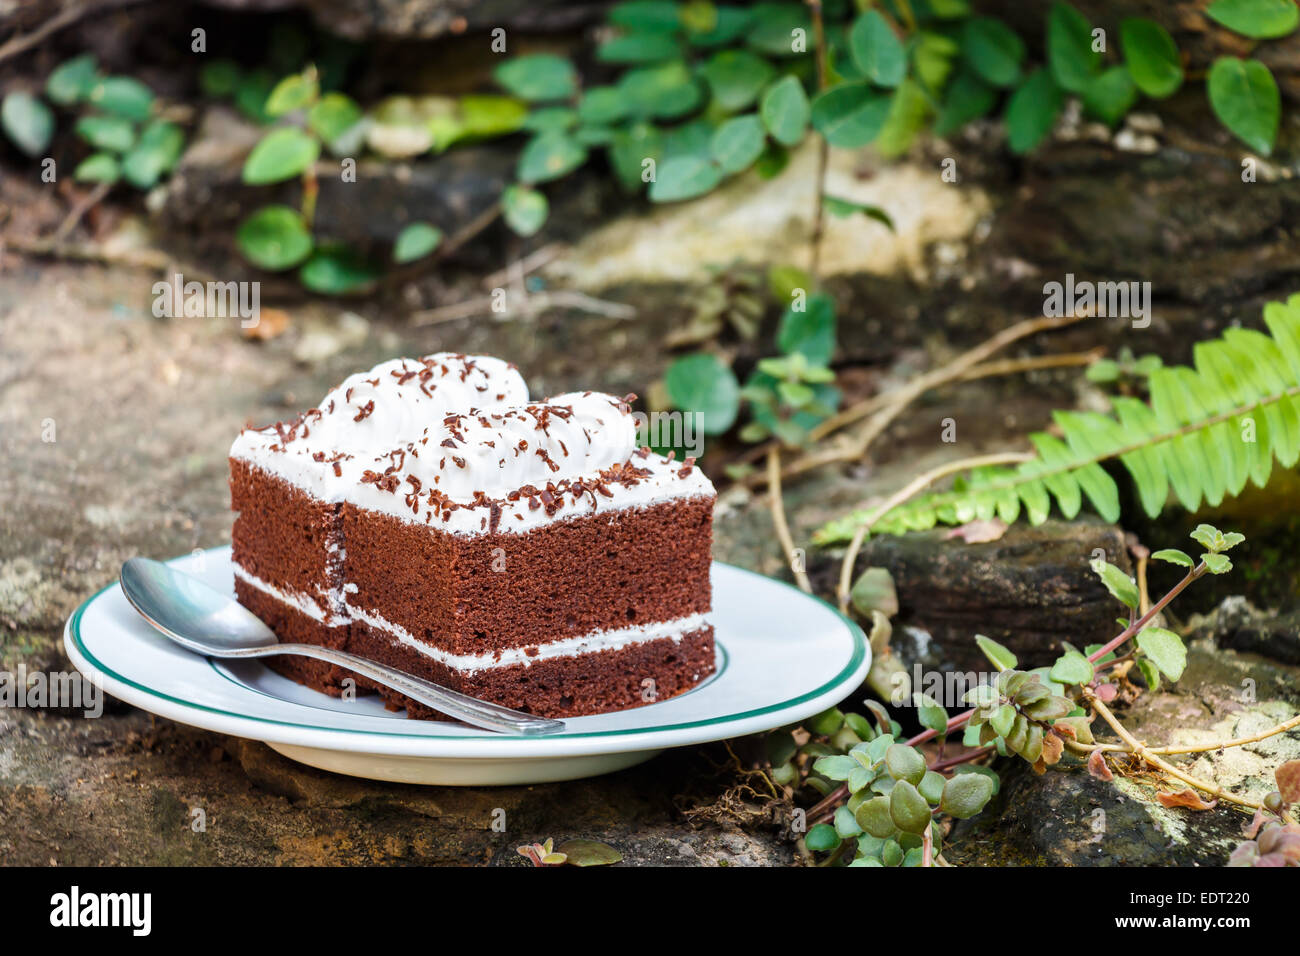 a chocolate cakes on rock in garden Stock Photo